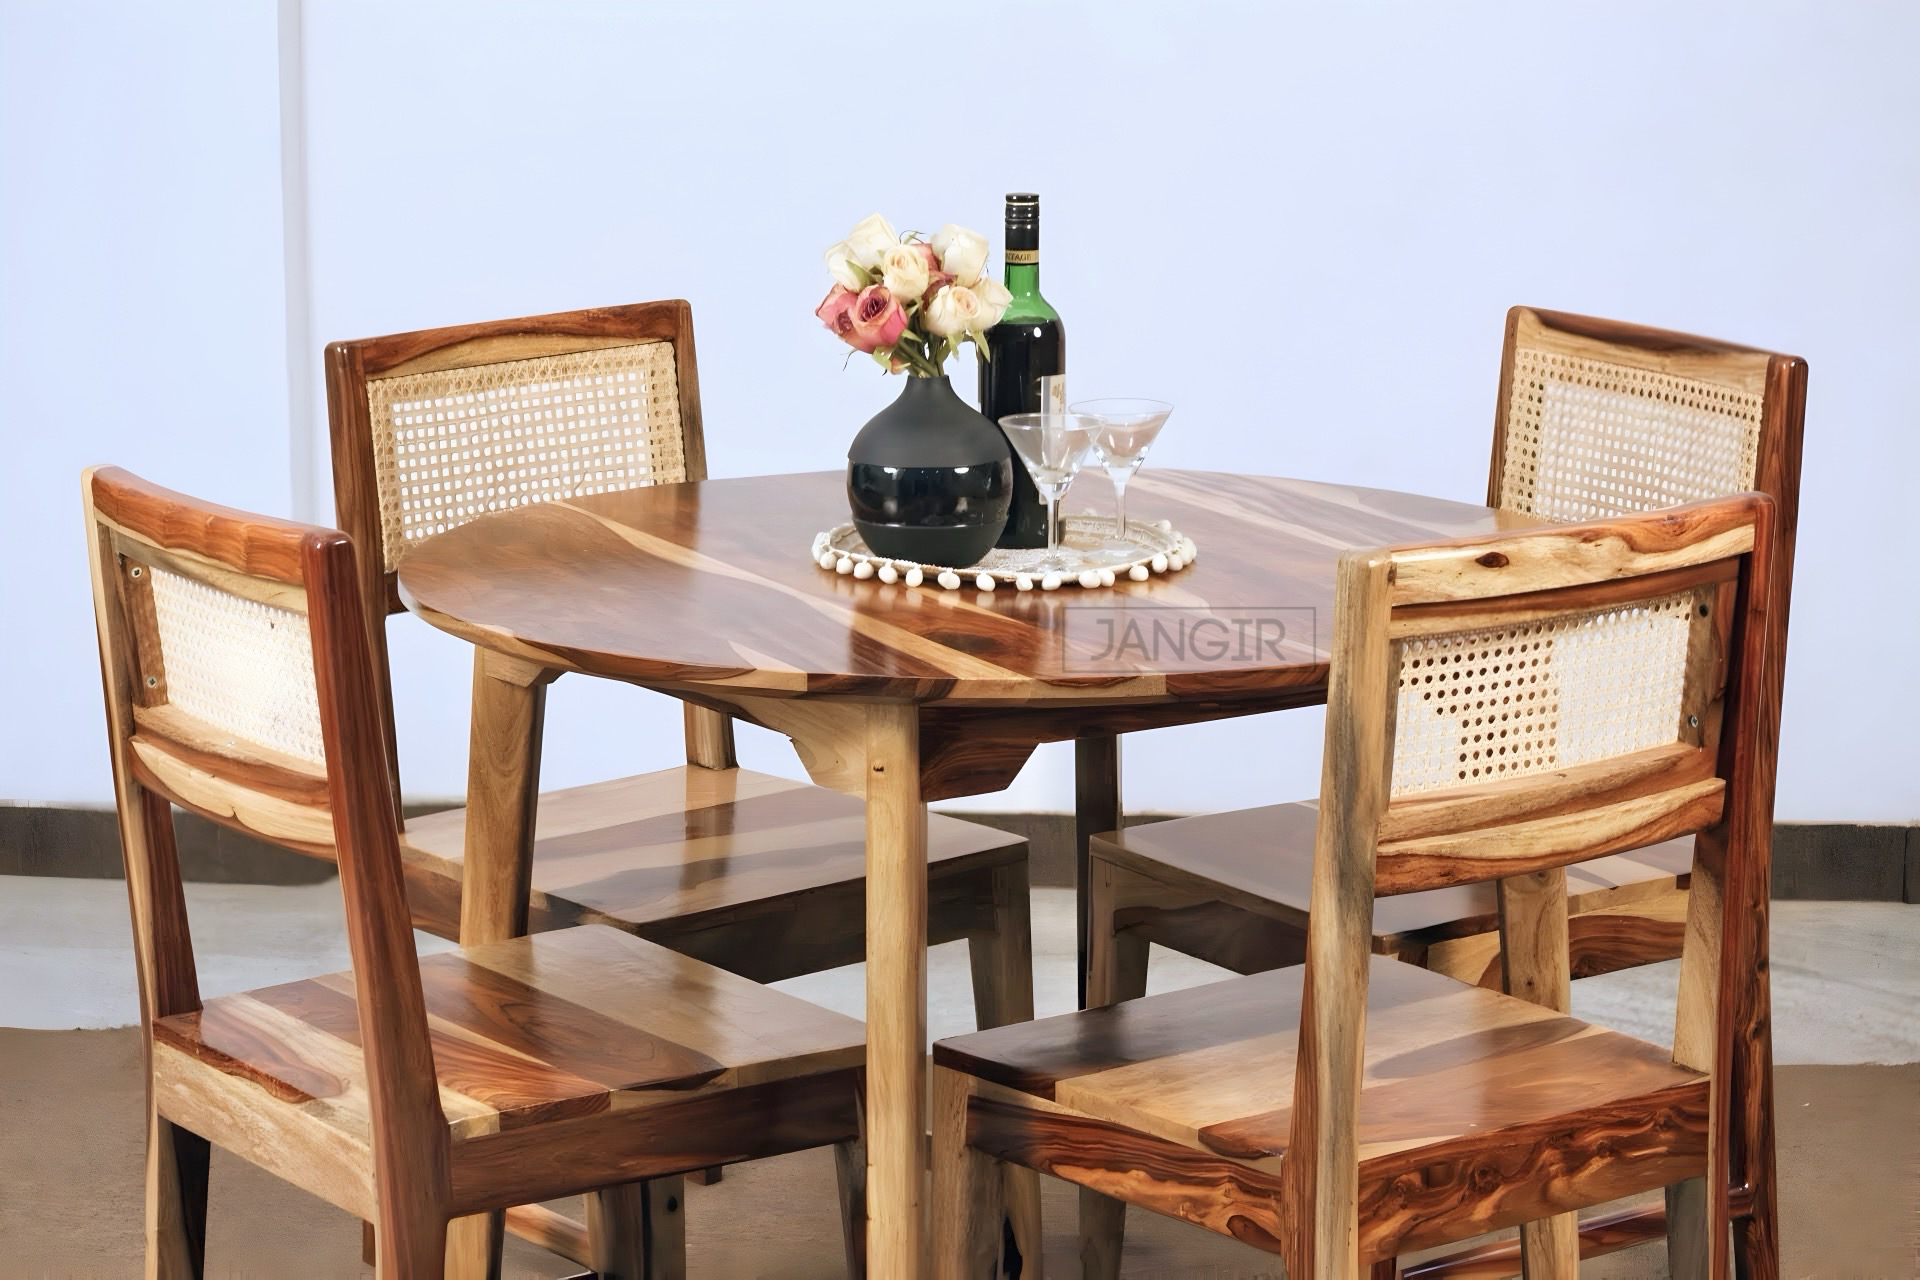 Elevate your dining experience with a modern round dining table set. This four seater dining table with cane chairs crafted from sheesham wood. Explore our dining table collection today !